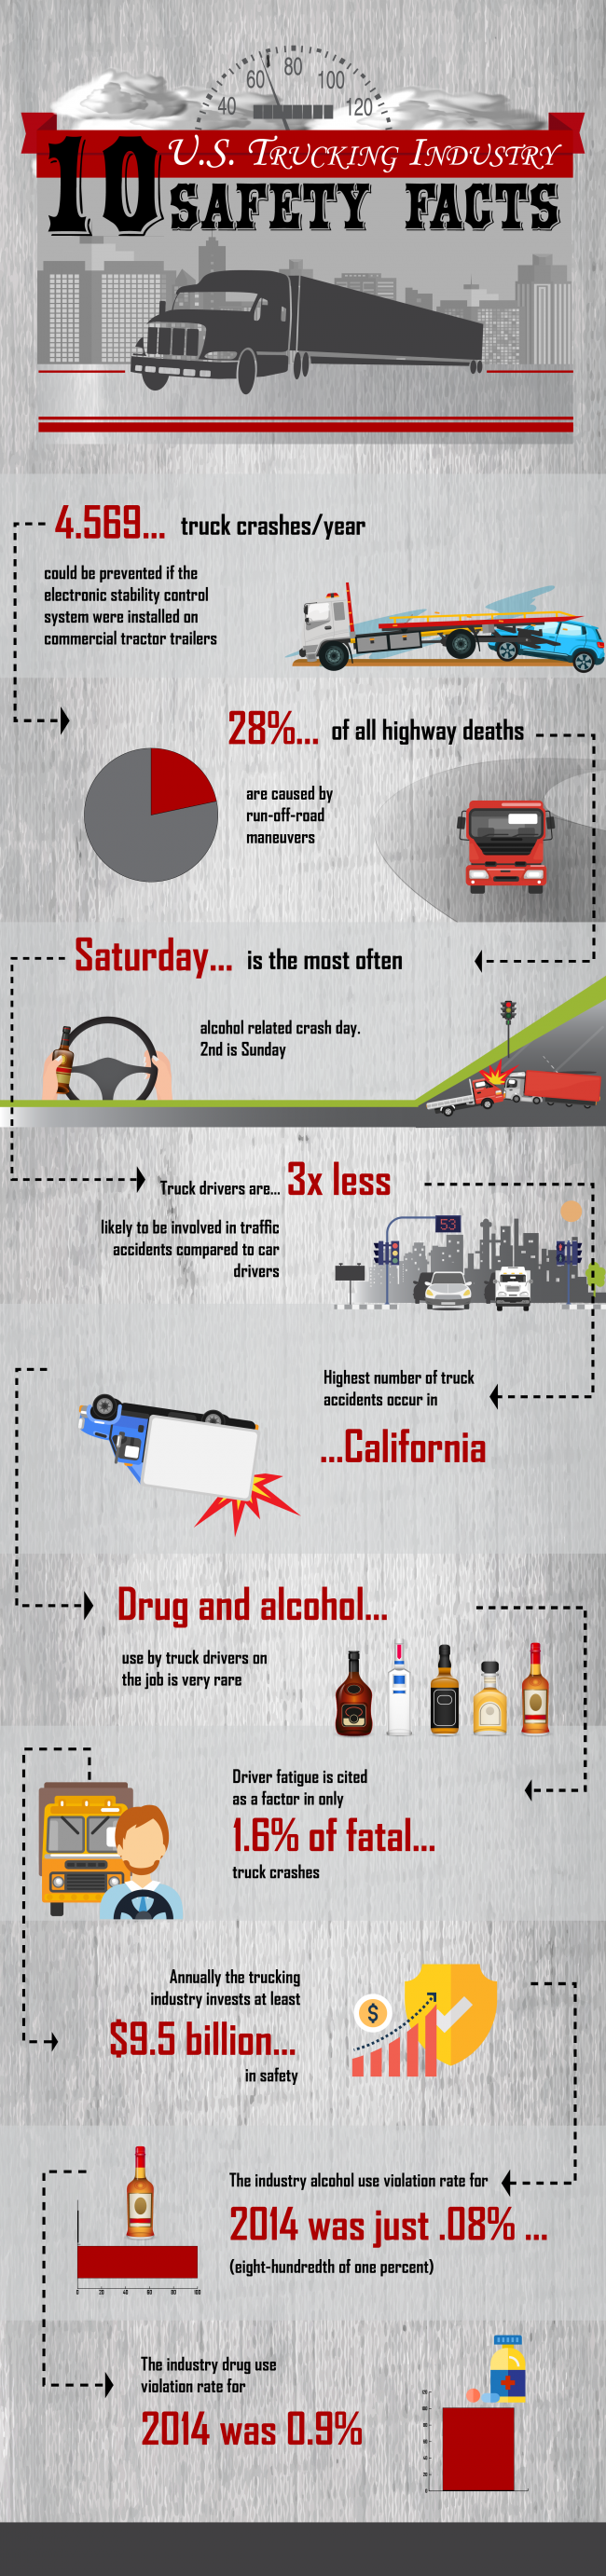 INFOGRAPHIC: 10 U.S. Trucking Industry Safety Facts